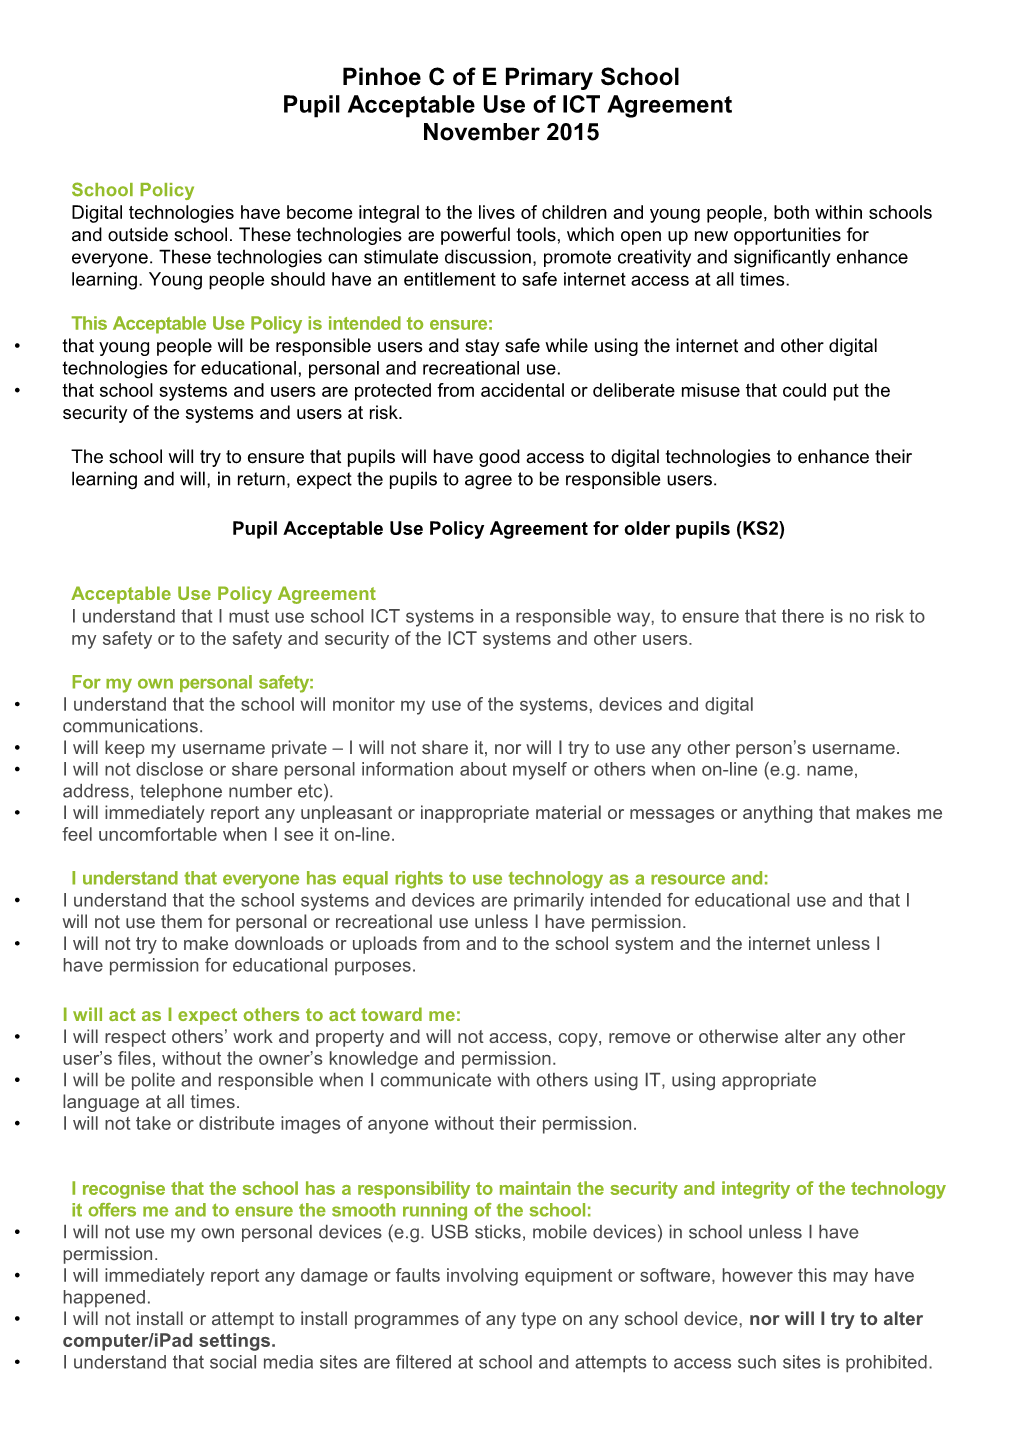 Pupil Acceptable Use of ICT Agreement